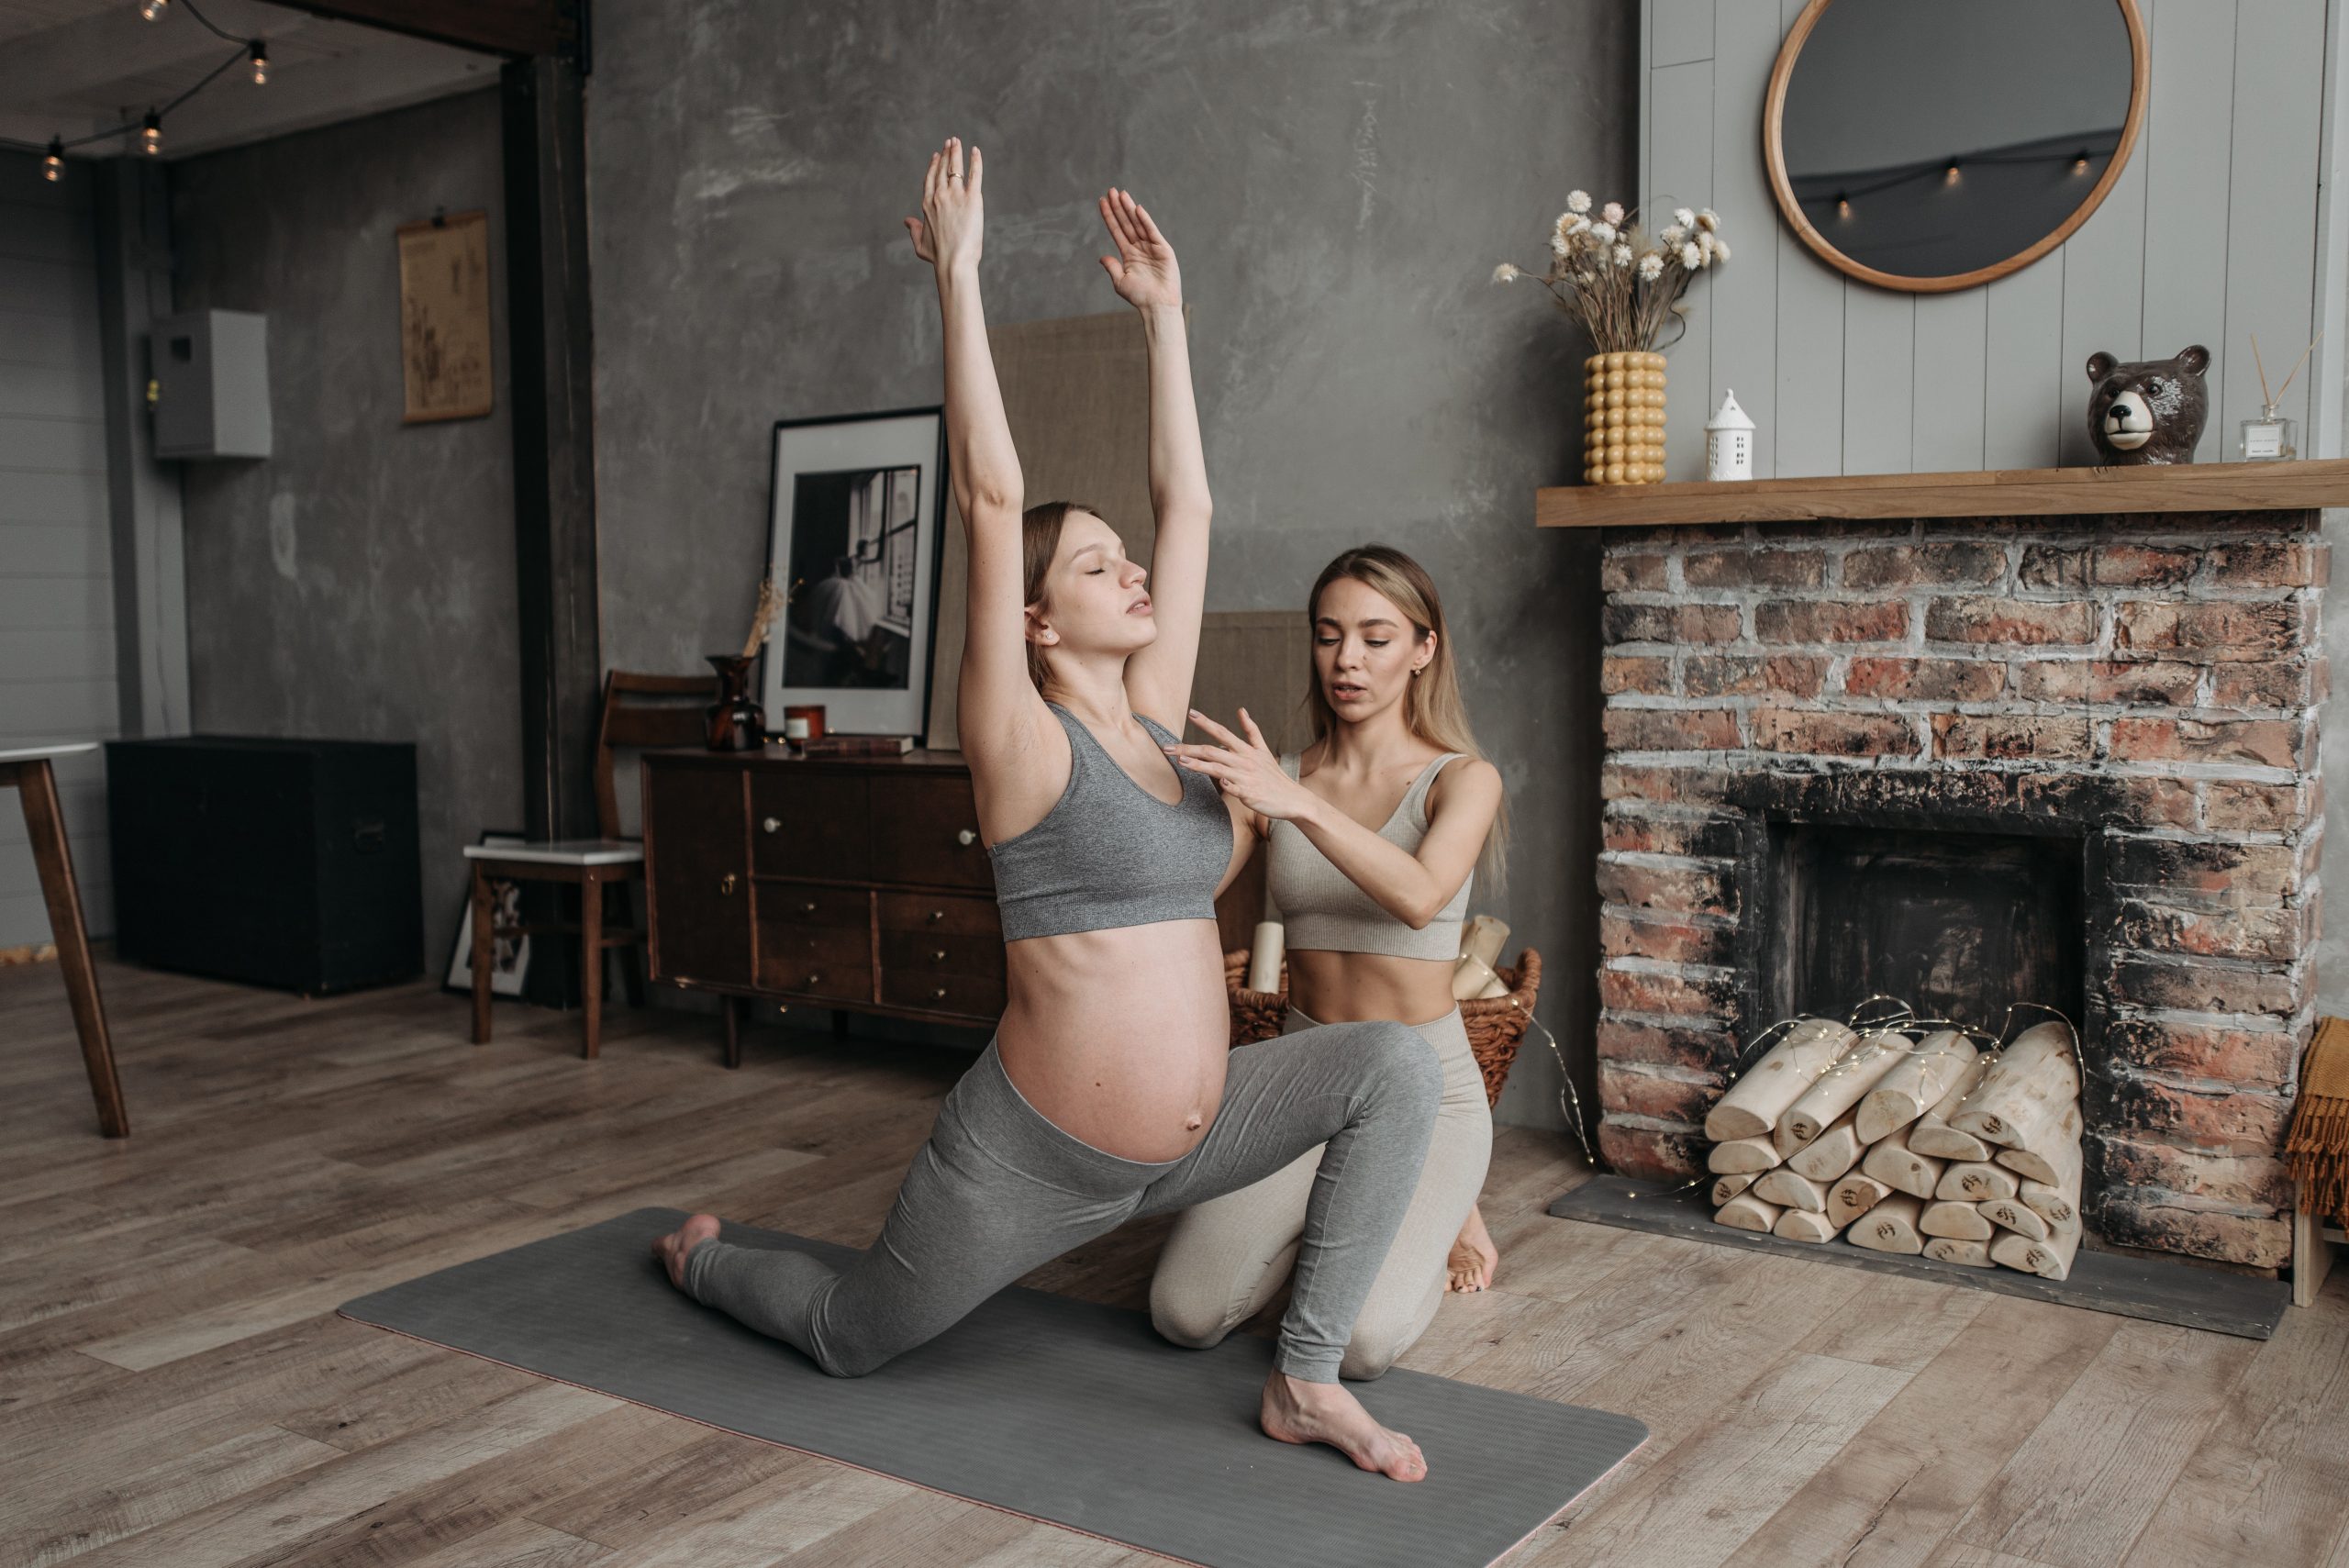 What does crossfit training look like for newlyweds and moms-to-be?